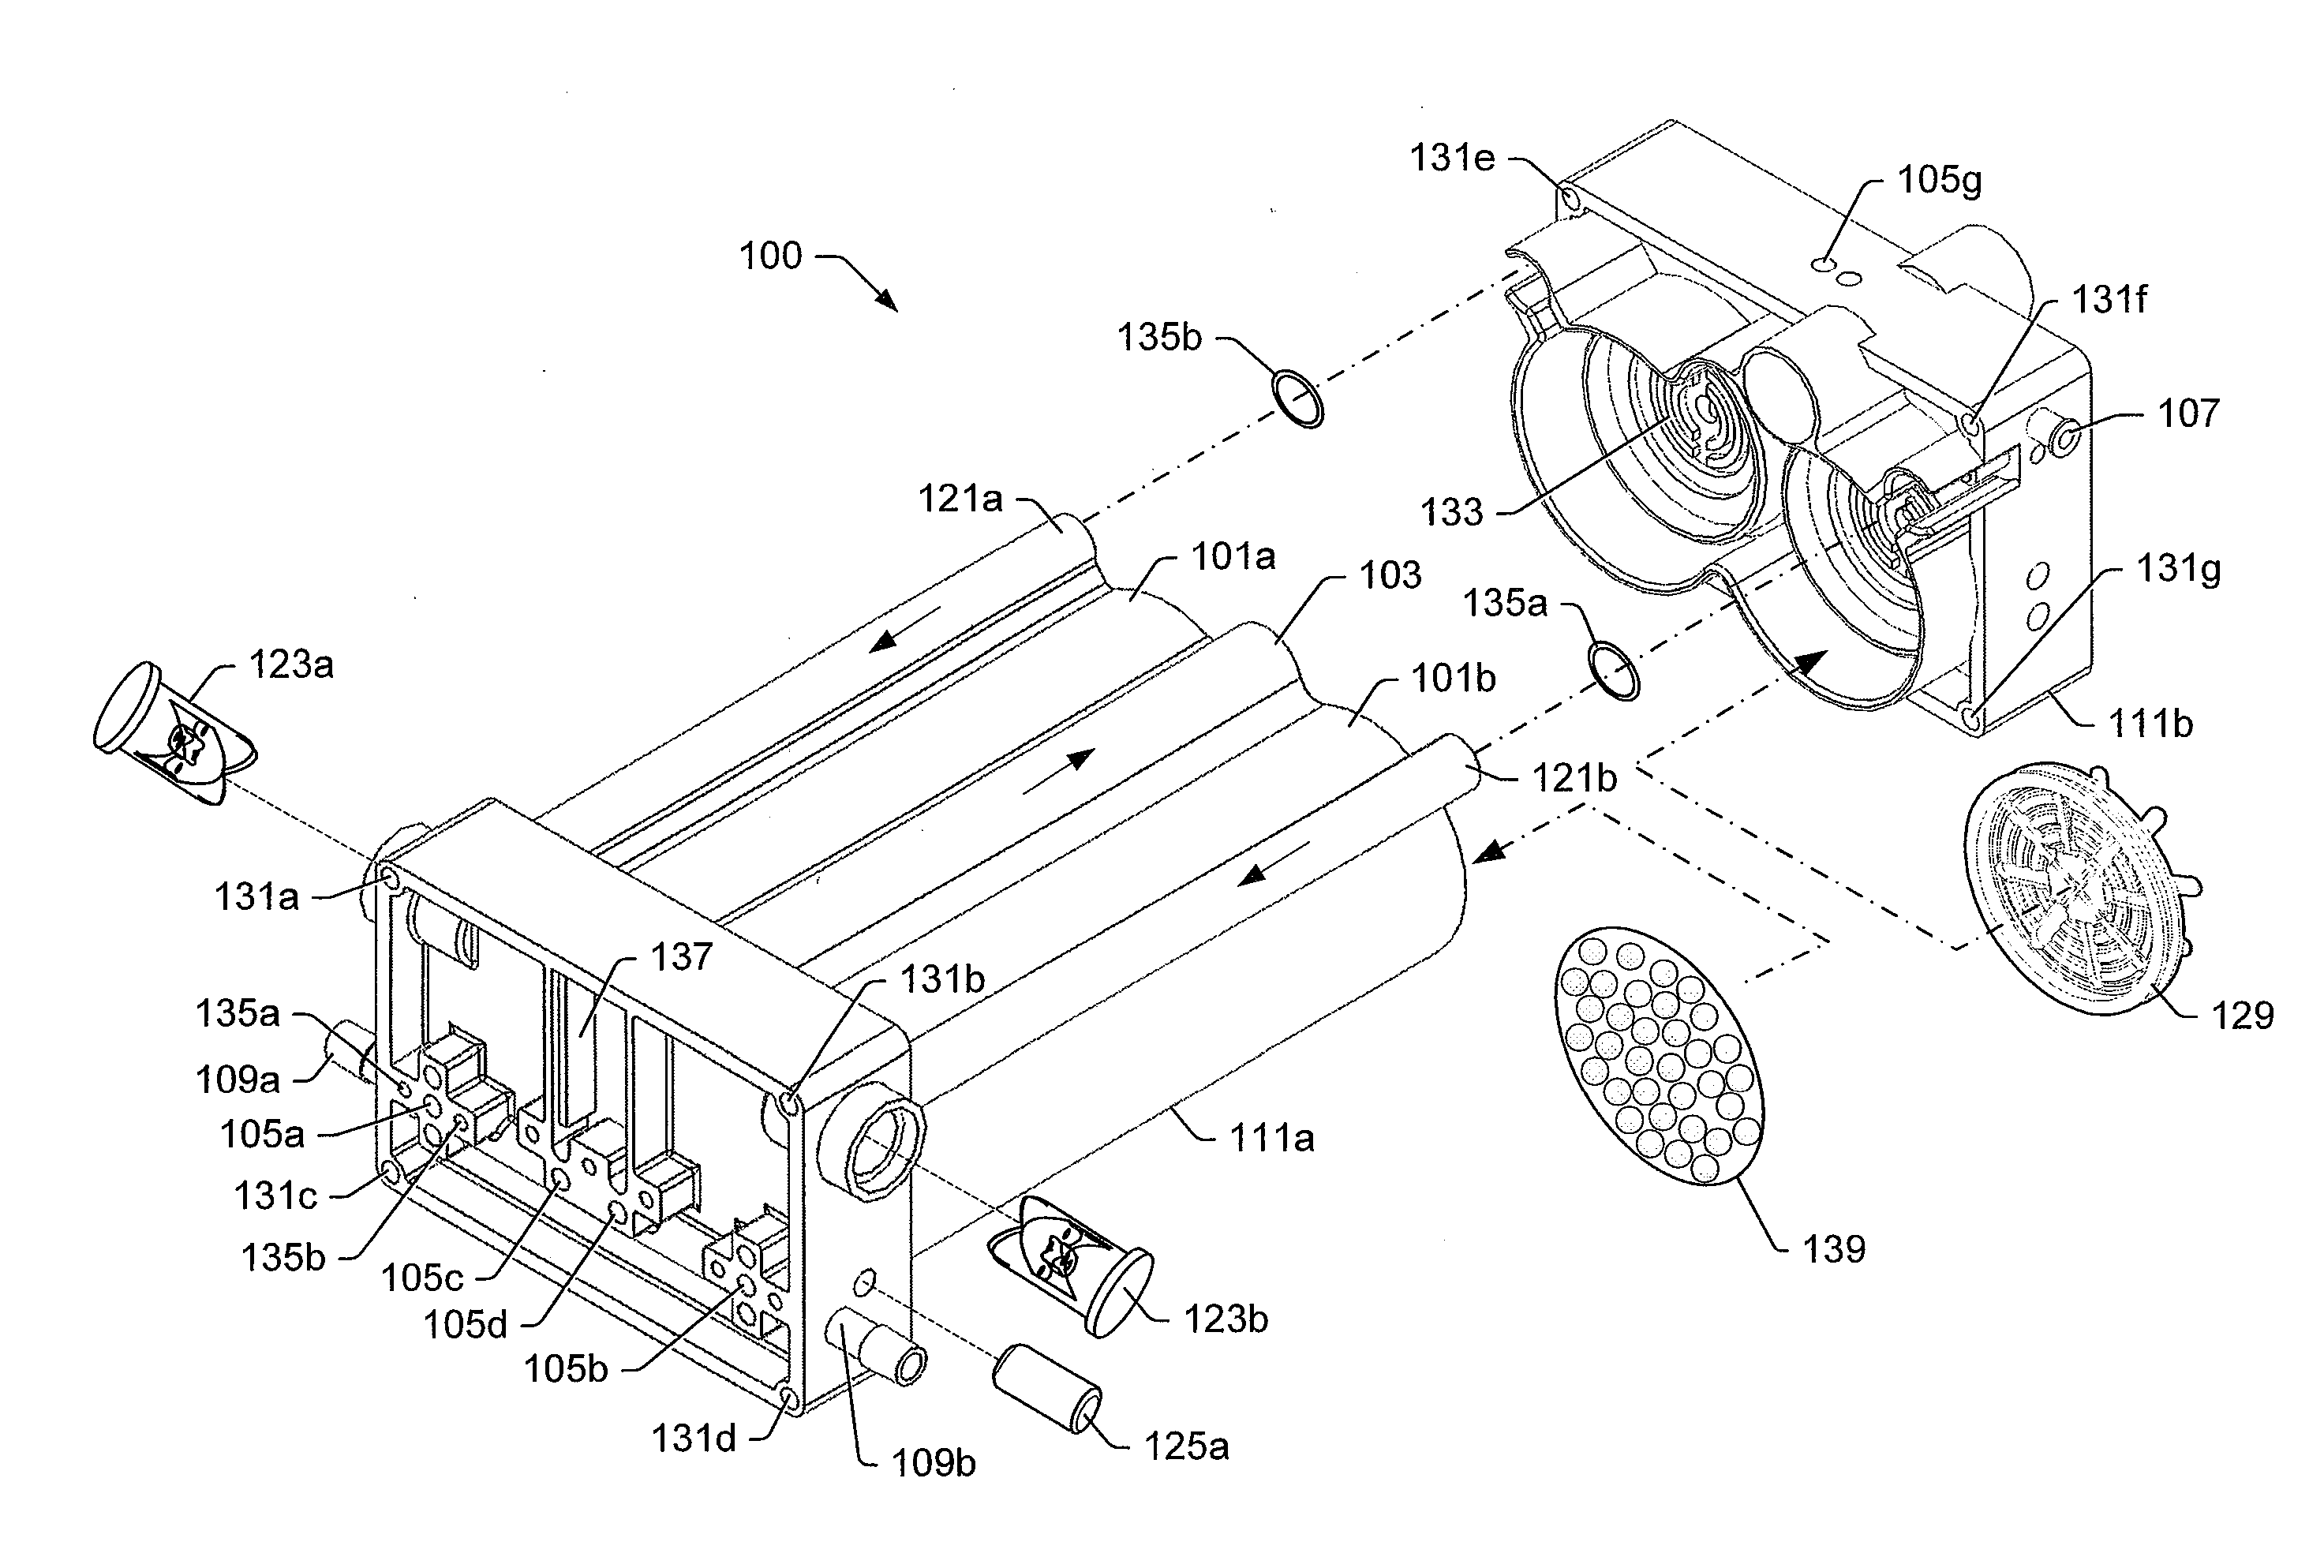 Oxygen concentrator apparatus and method